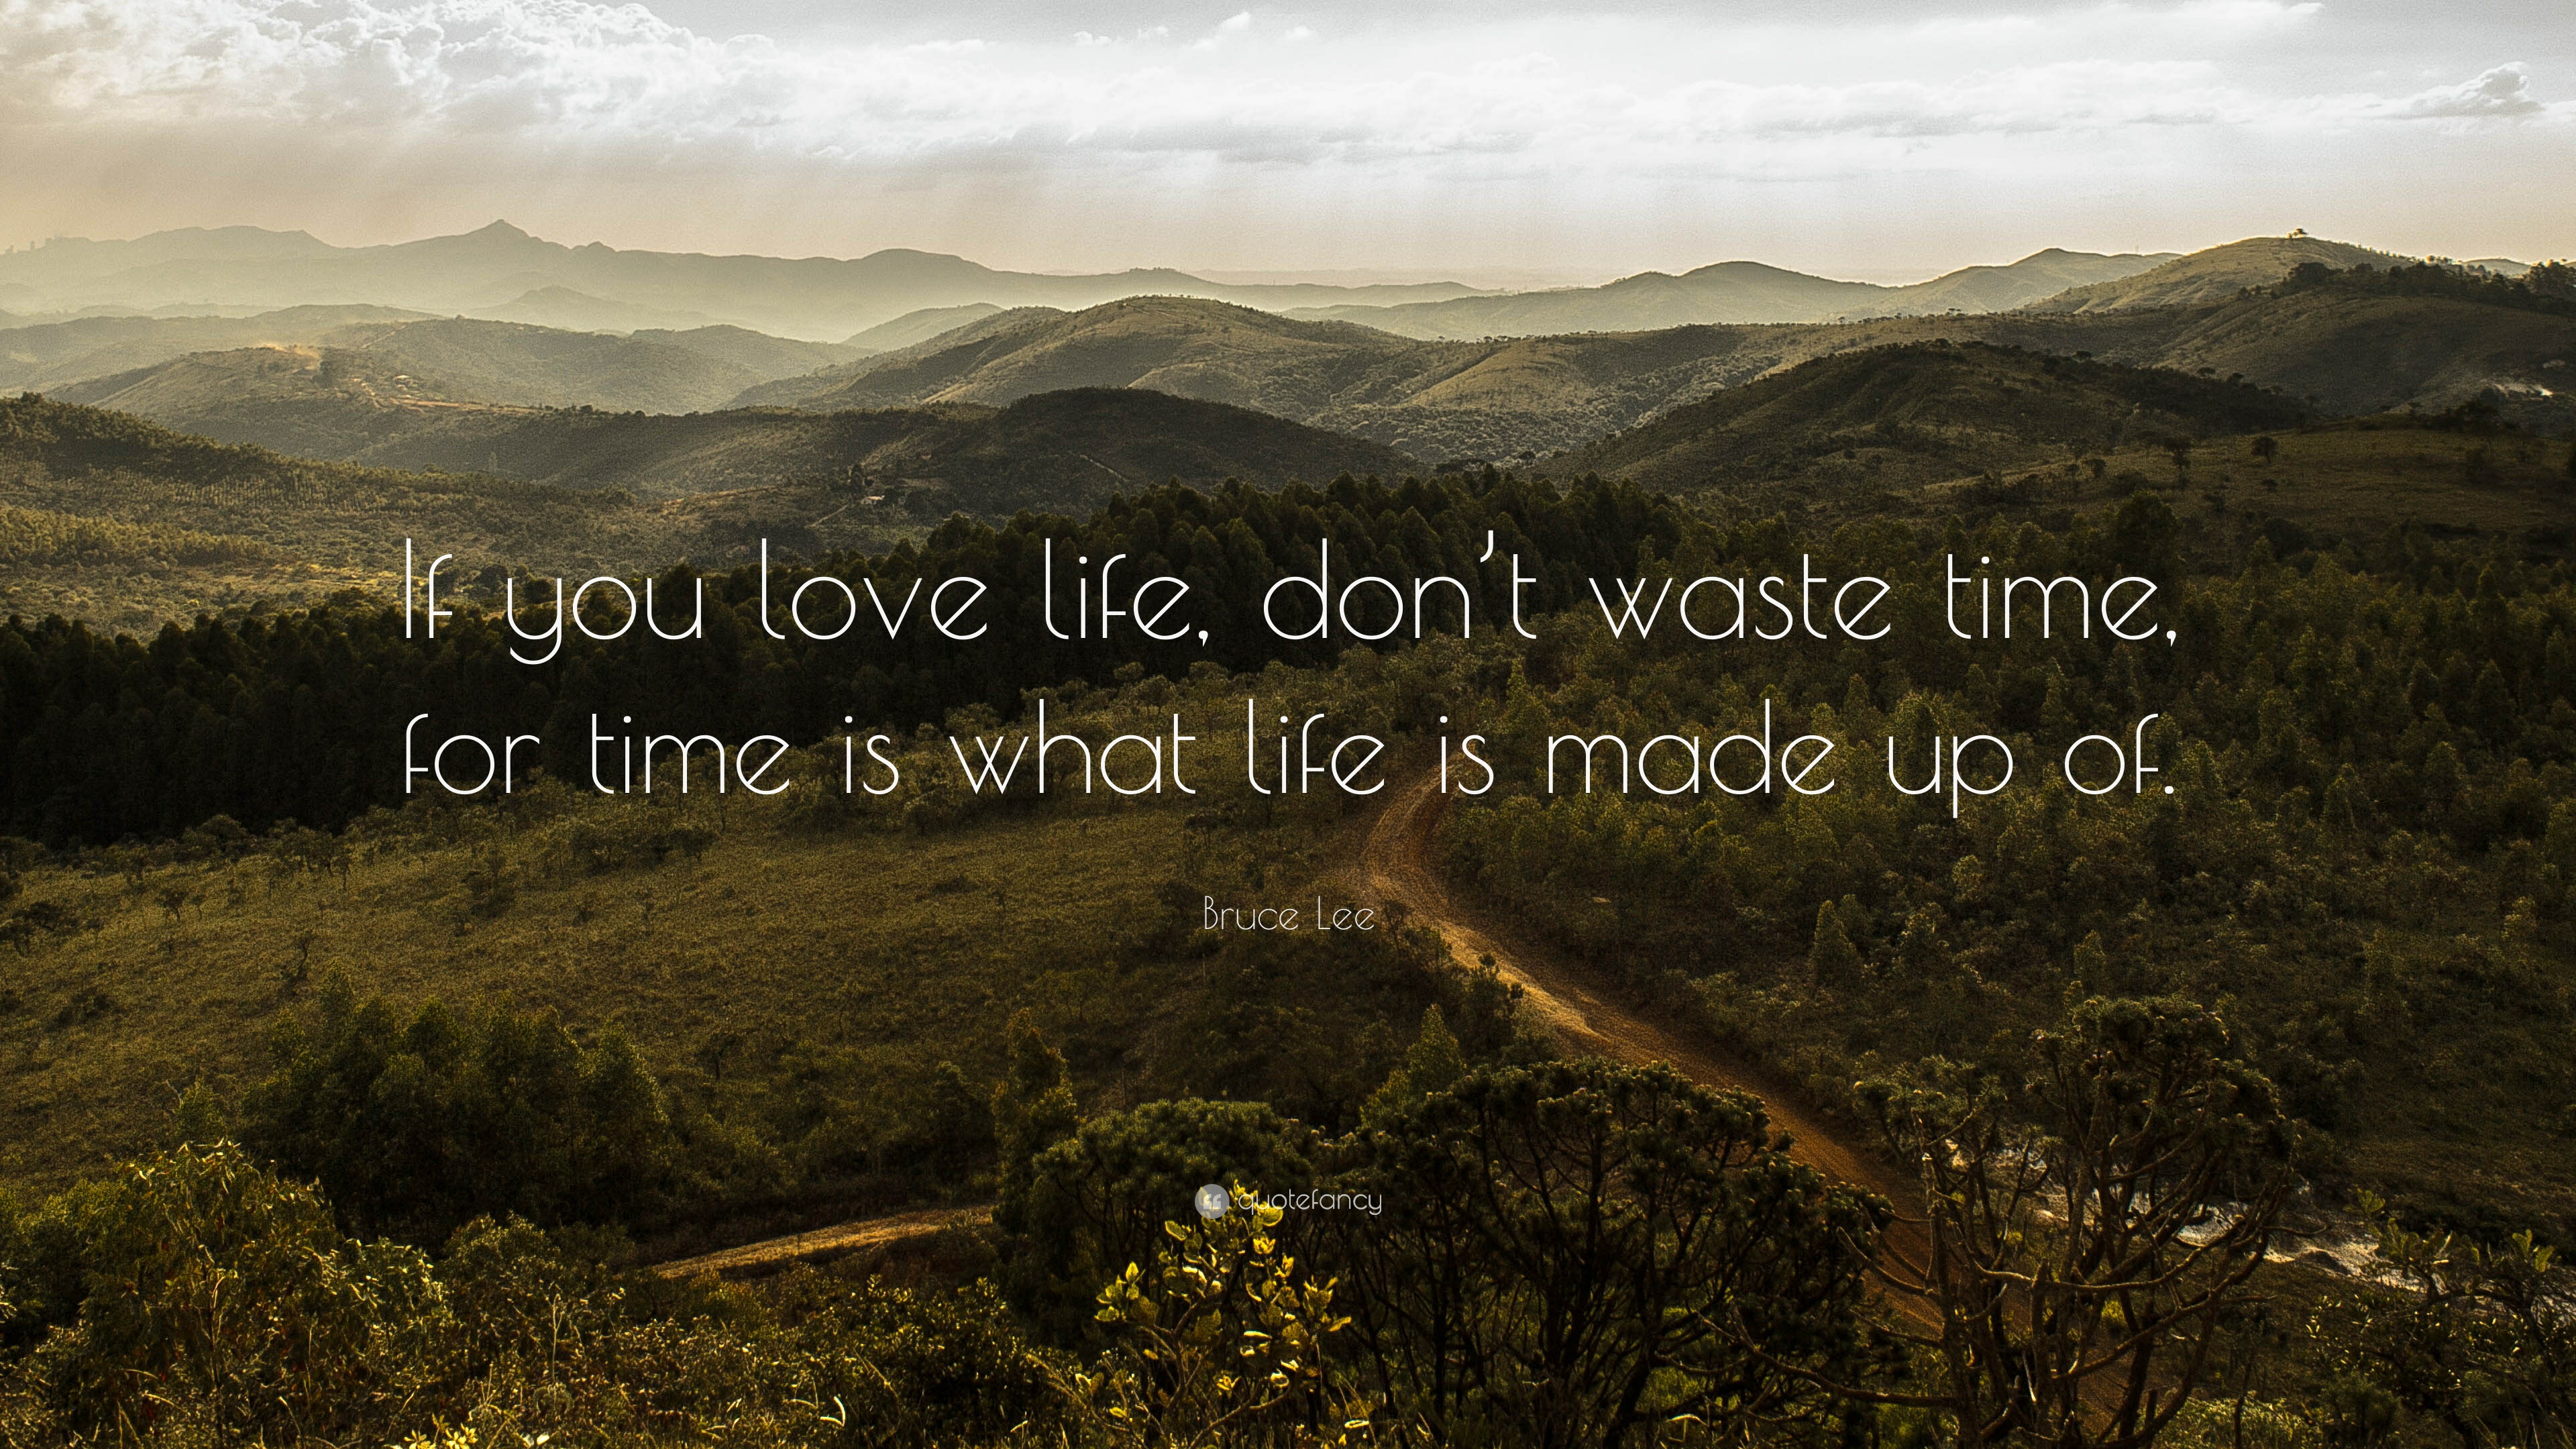 Bruce Lee Quote: “If you love life, don't waste time, for time is what life